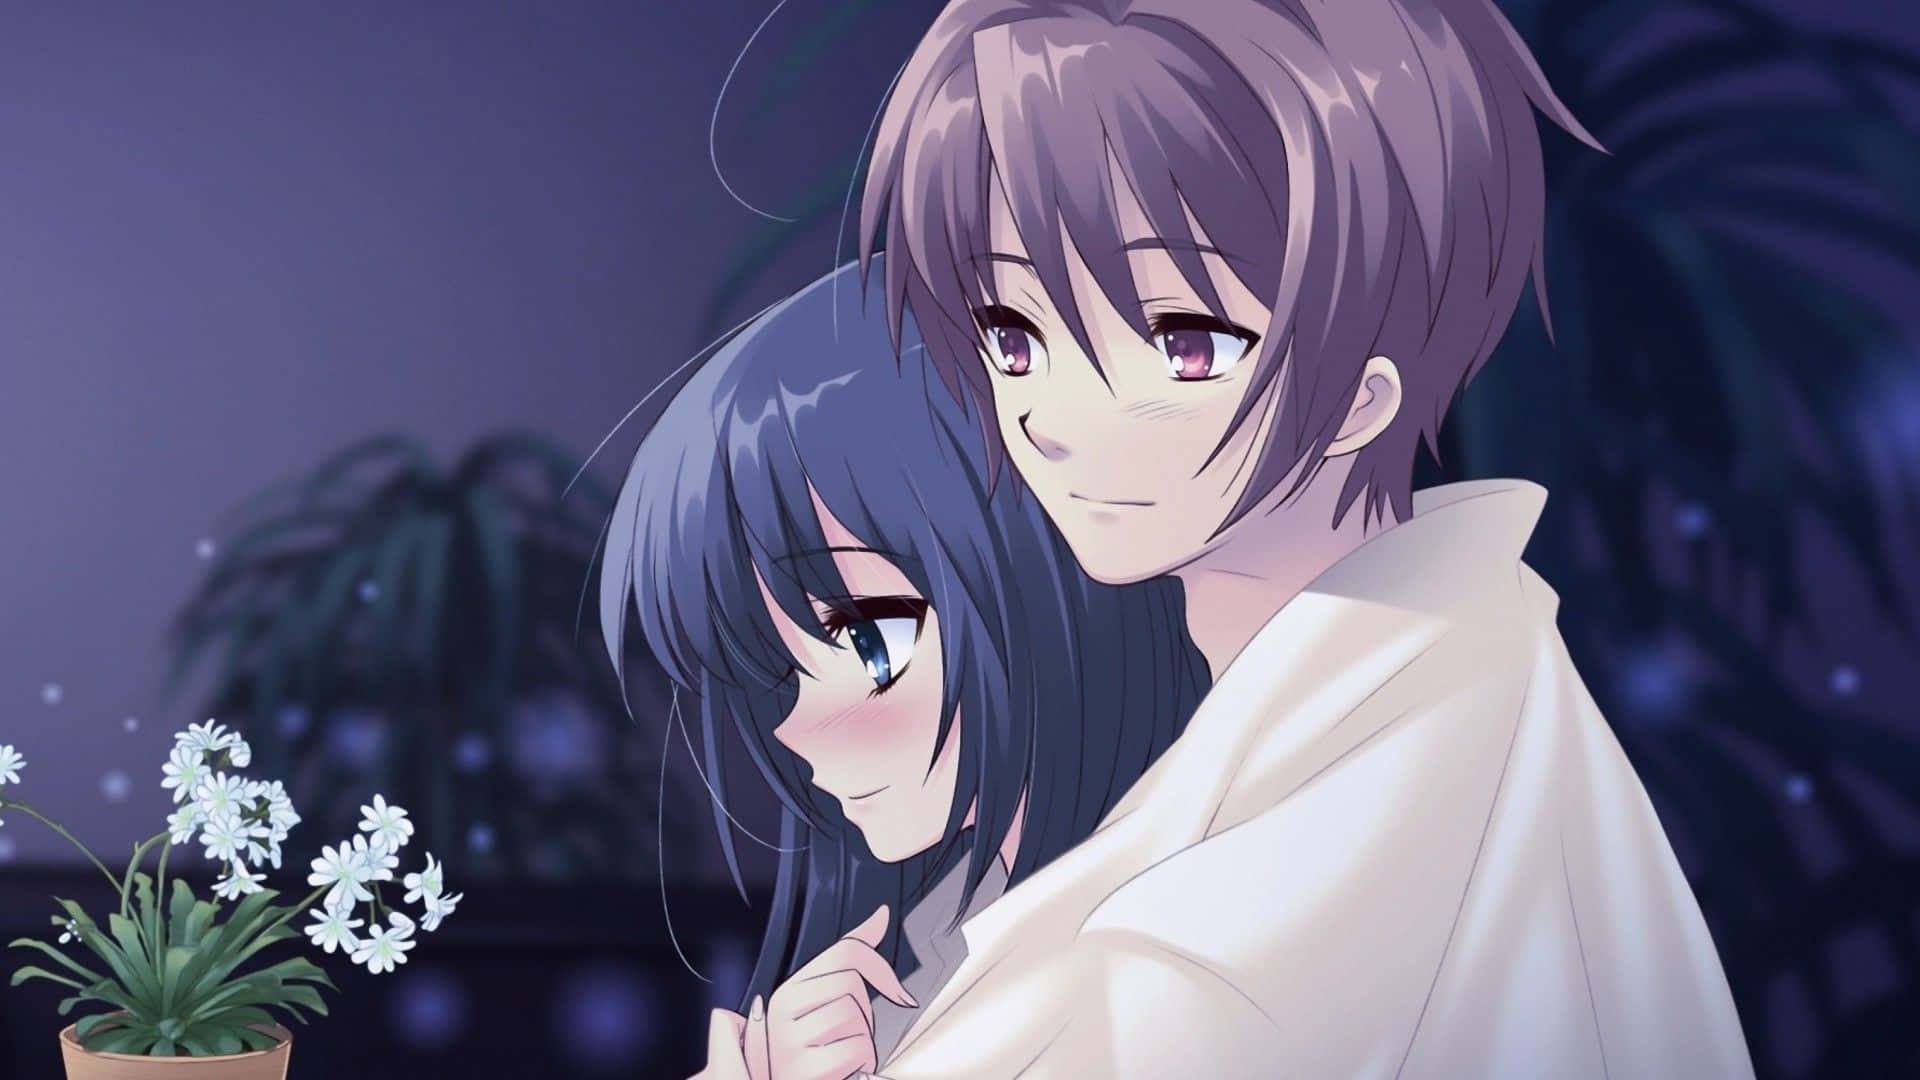 This Japanese anime couple are having a romantic moment. Wallpaper